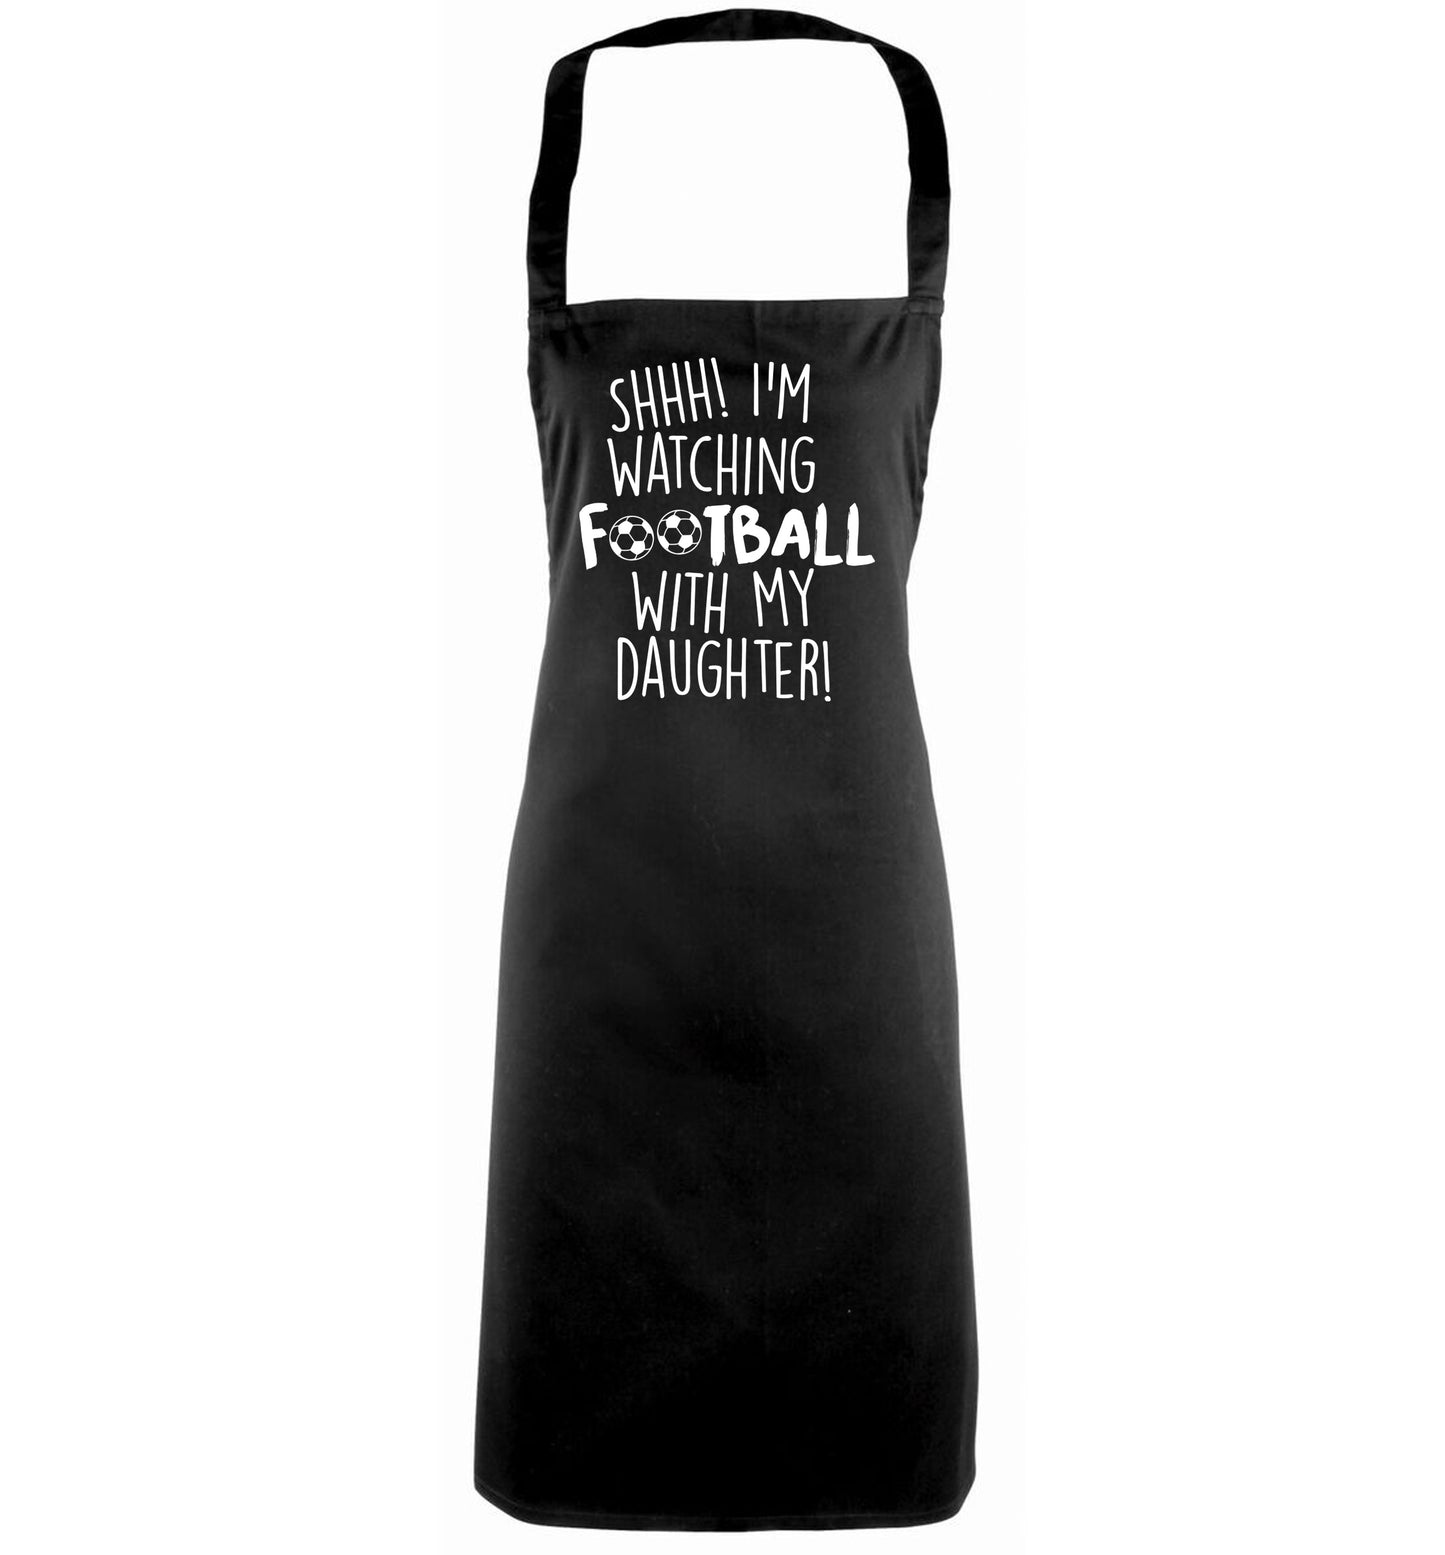 Shhh I'm watching football with my daughter black apron